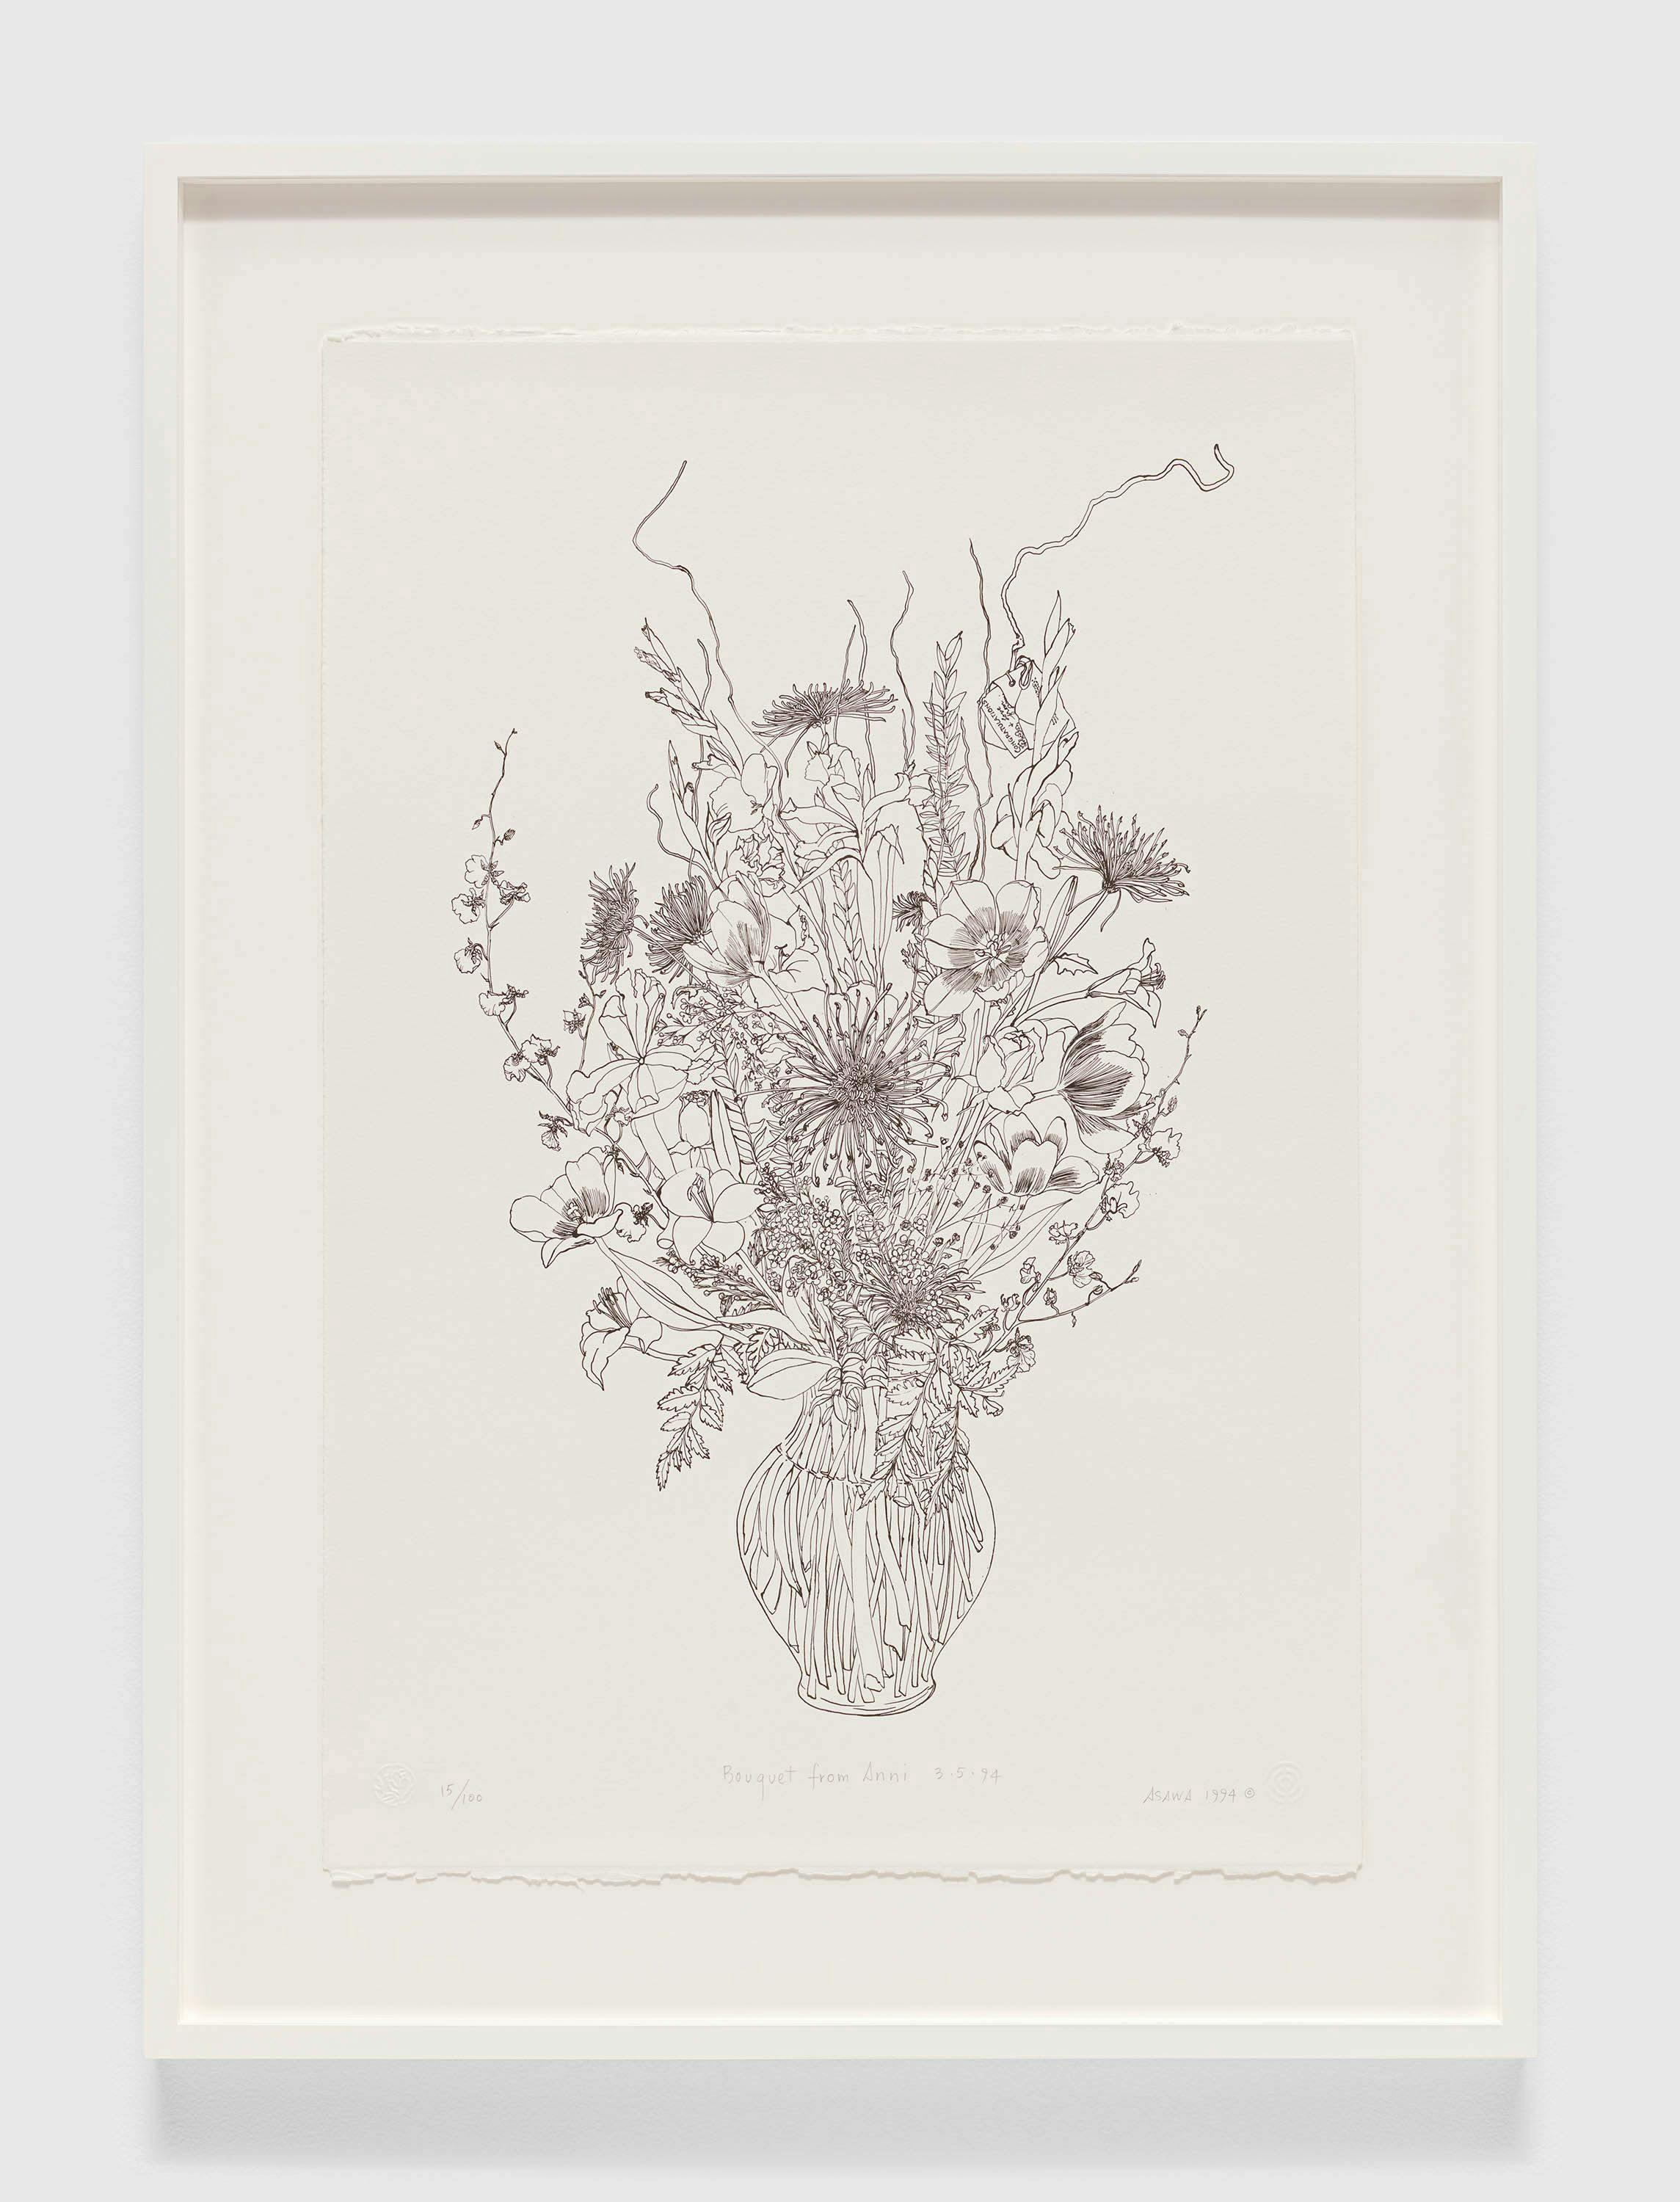 An offset lithograph on paper by Ruth Asawa, titled Bouquet from Anni (P.013), dated 1994.